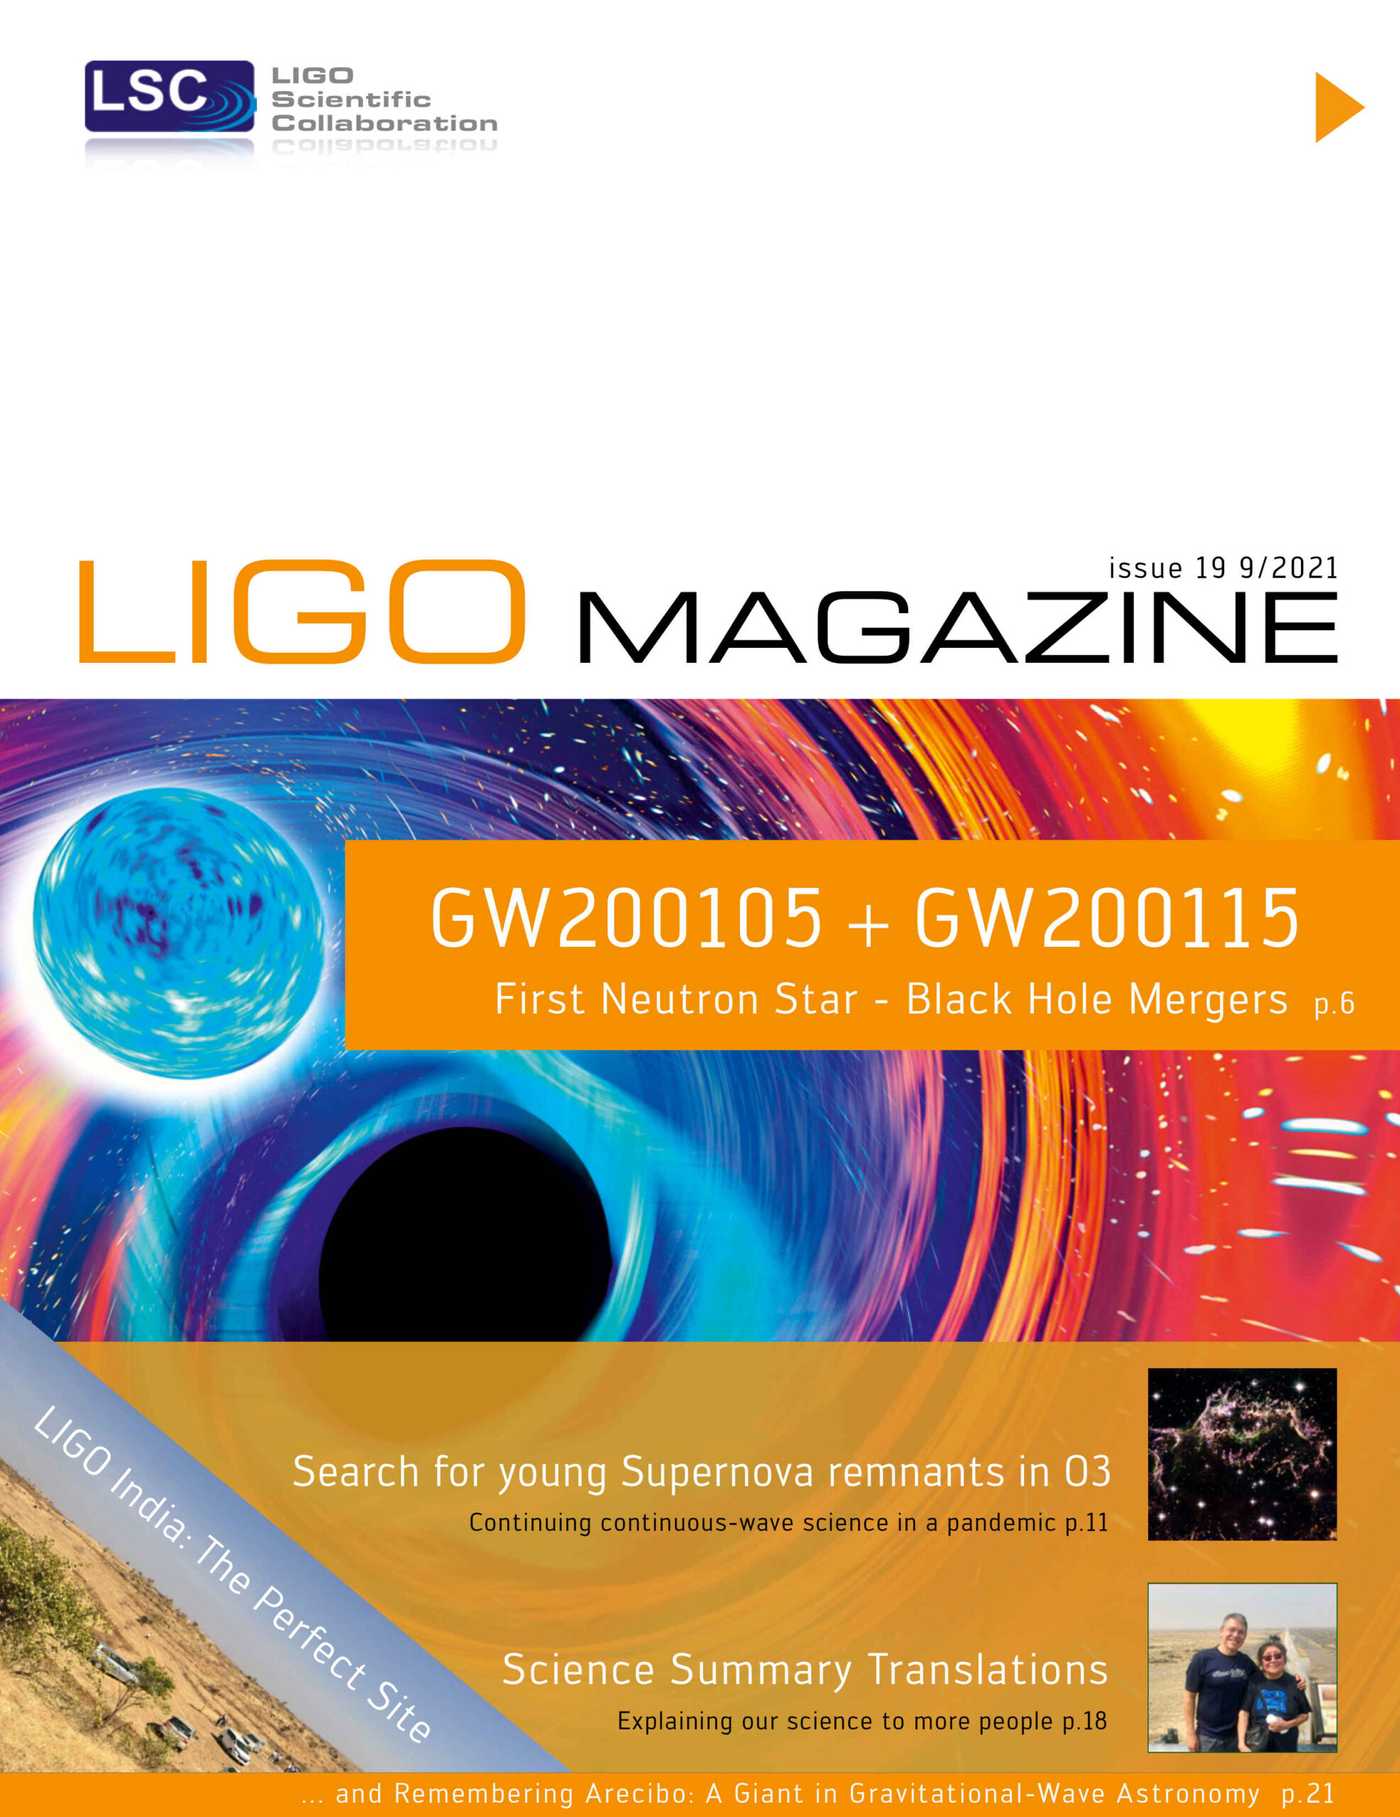 News-Image 41 of: New LIGO Magazine Issue 19 is out